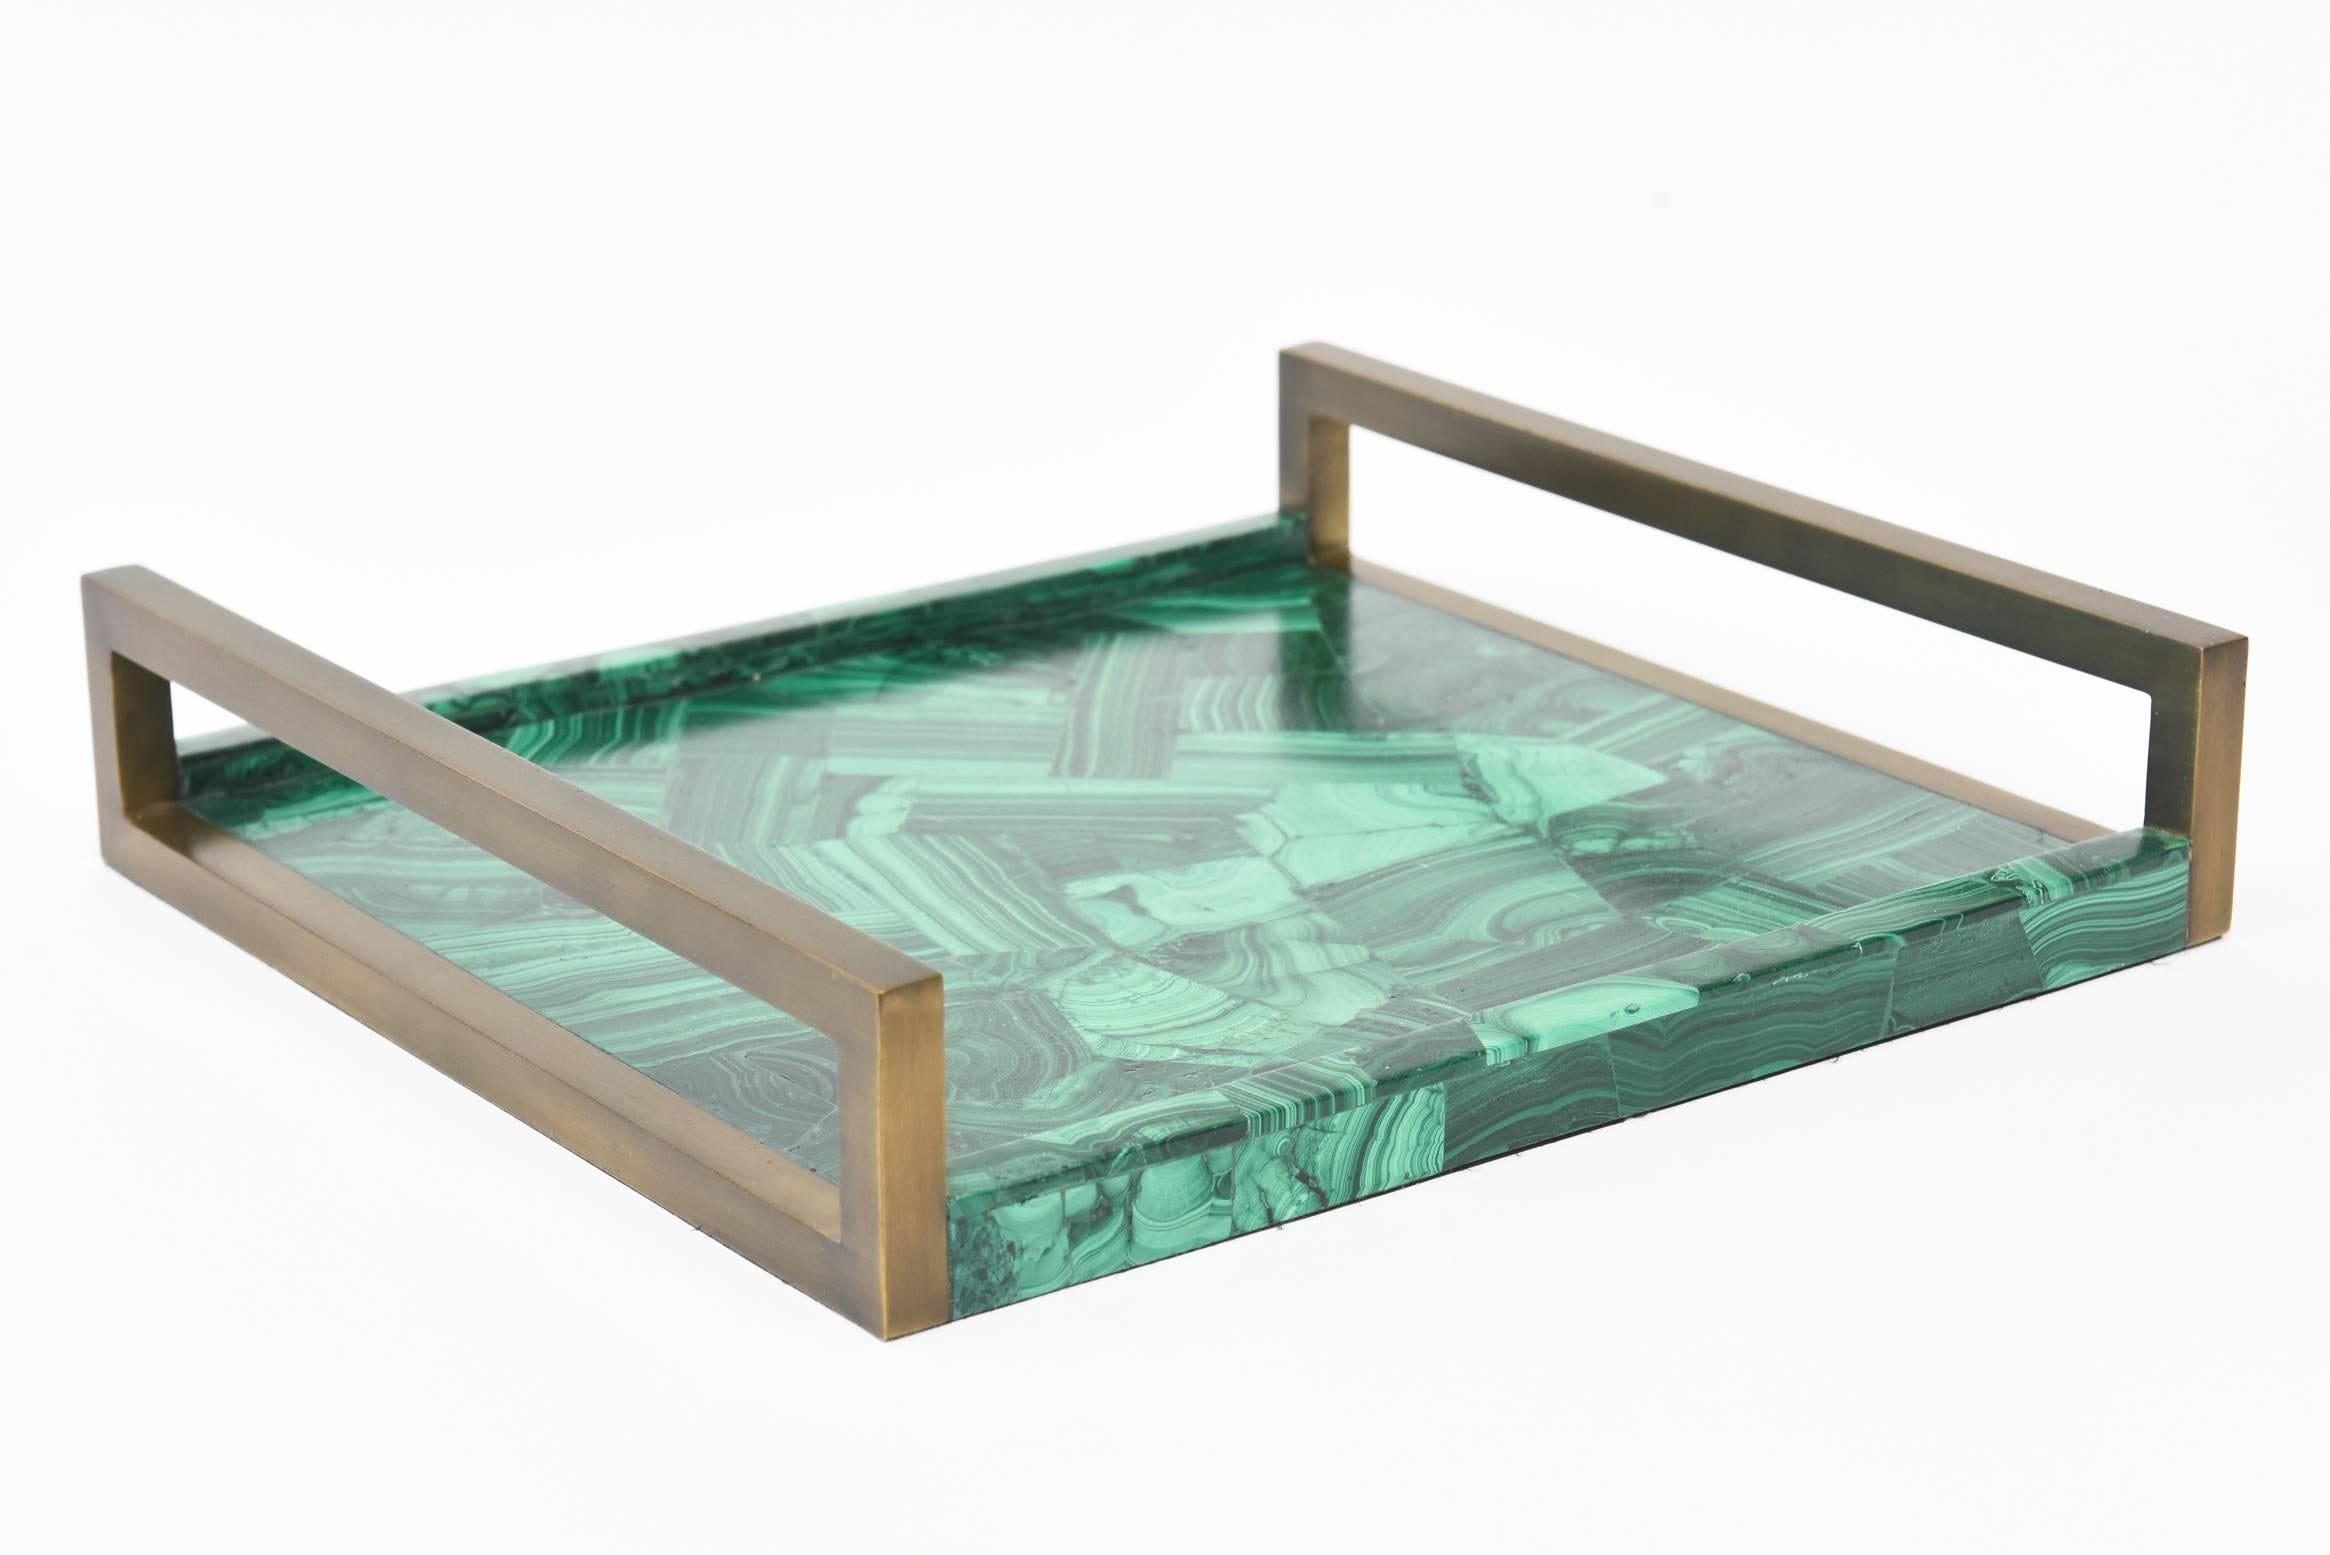 This ultra-chic R&Y Augousti tray has oiled brass darkened handles with faux malachite tessellated composite pieces in the interior of the tray. This is very well made. This was made in the 1990s. The faux malachite interior is 1